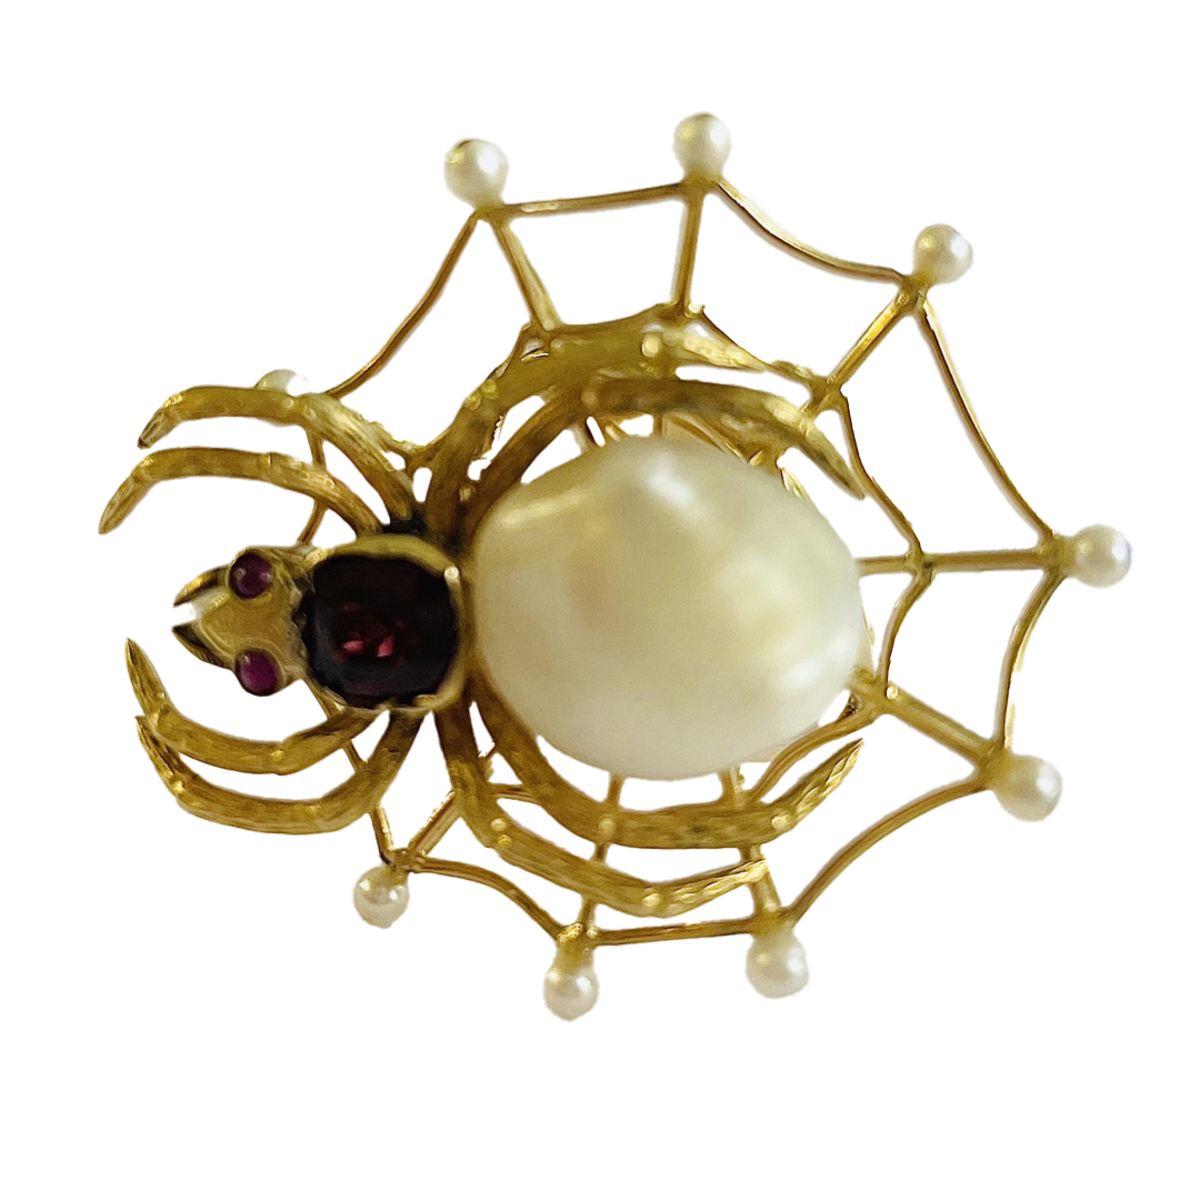 Post-1980s 18KT Yellow Gold Natural Pearl & Garnet Spider Ring front view